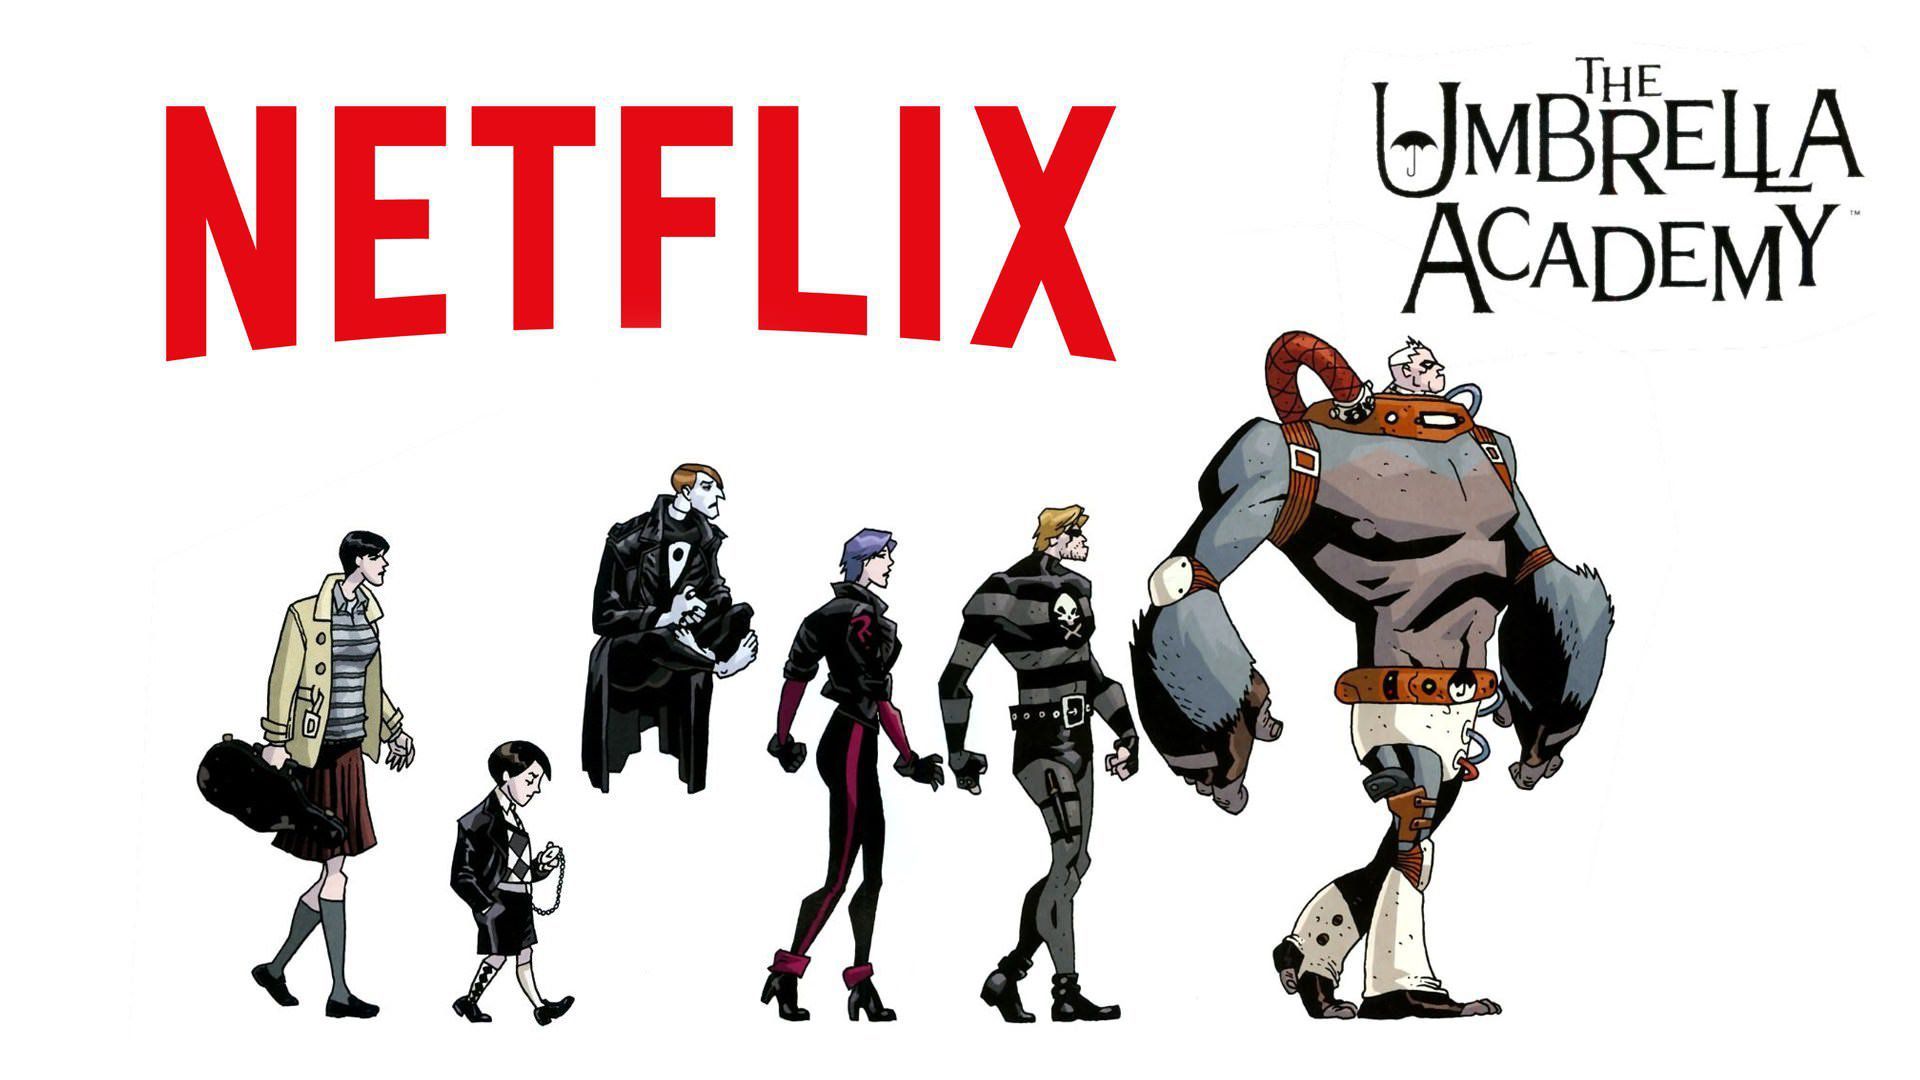 The Umbrella Academy -Is It Any Good?